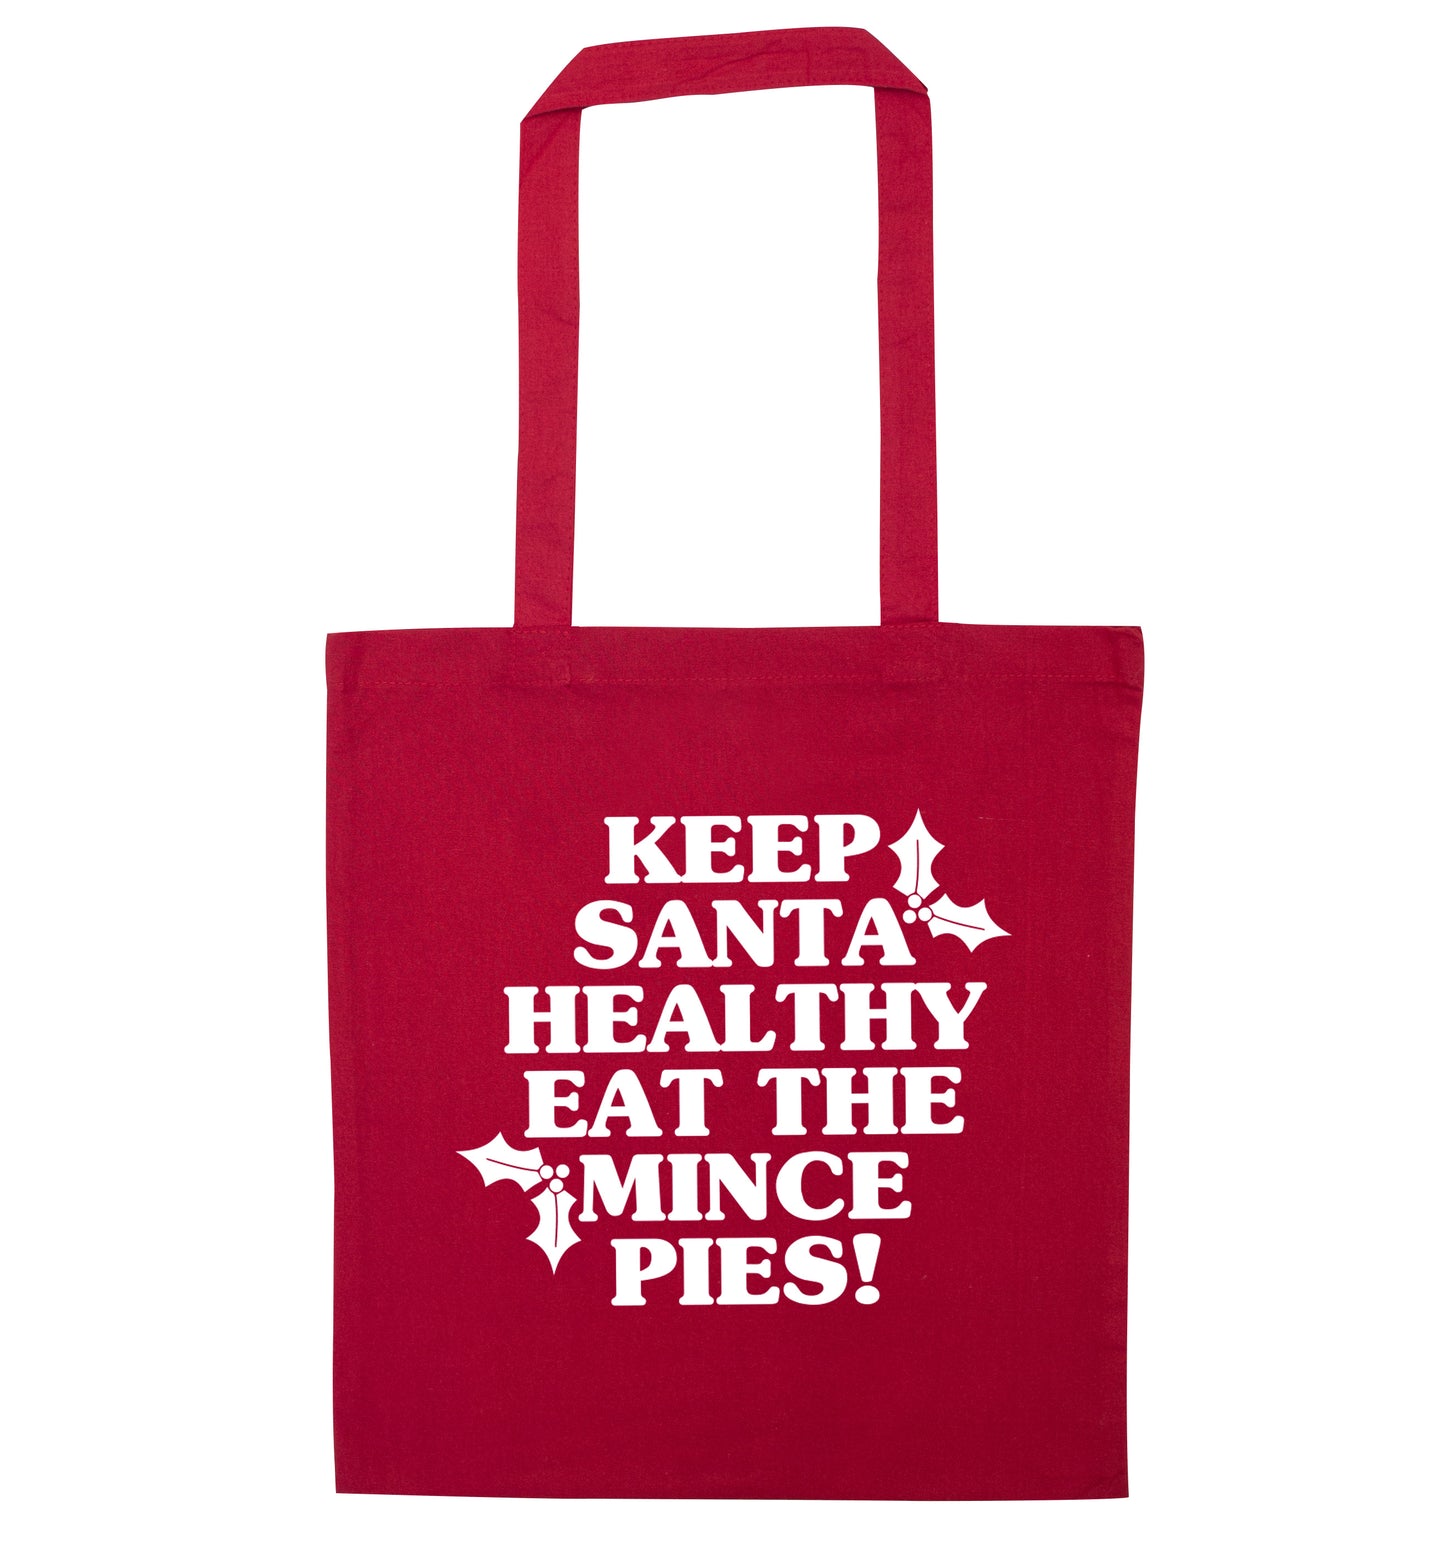 Keep santa healthy eat the mince pies red tote bag